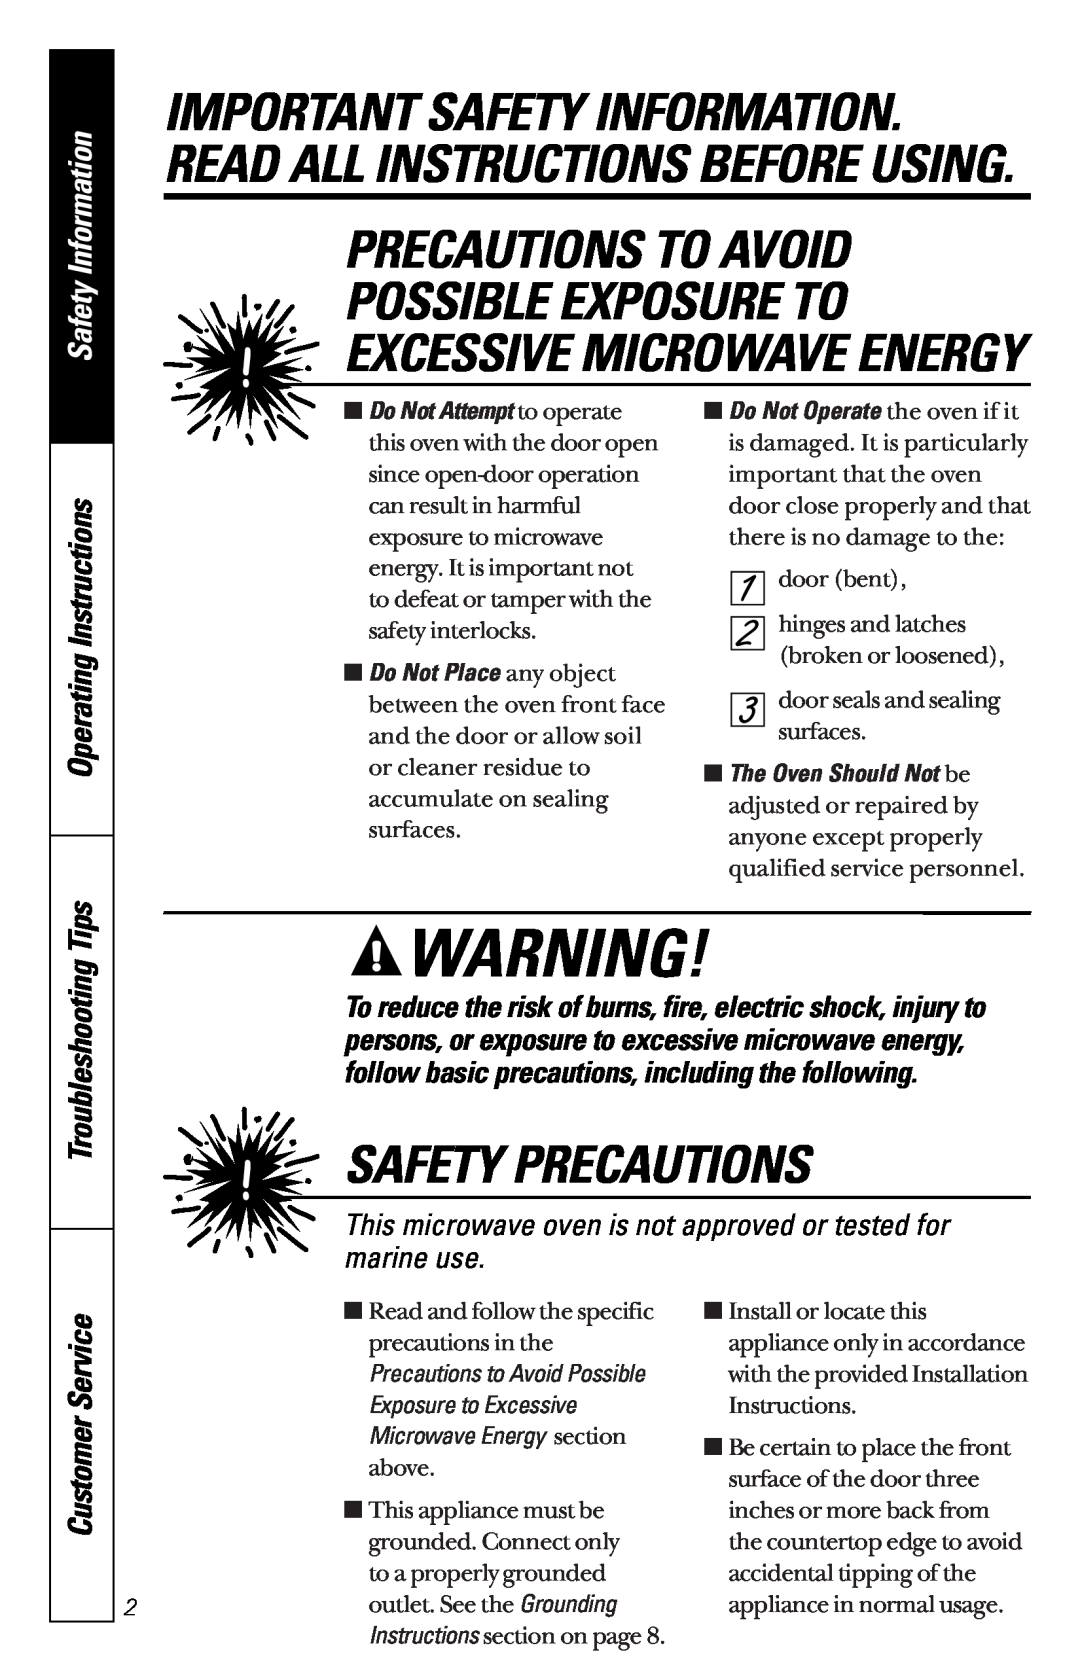 GE JES1851 Possible Exposure To Excessive Microwave Energy, Safety Information, Operating Instructions, Customer Service 